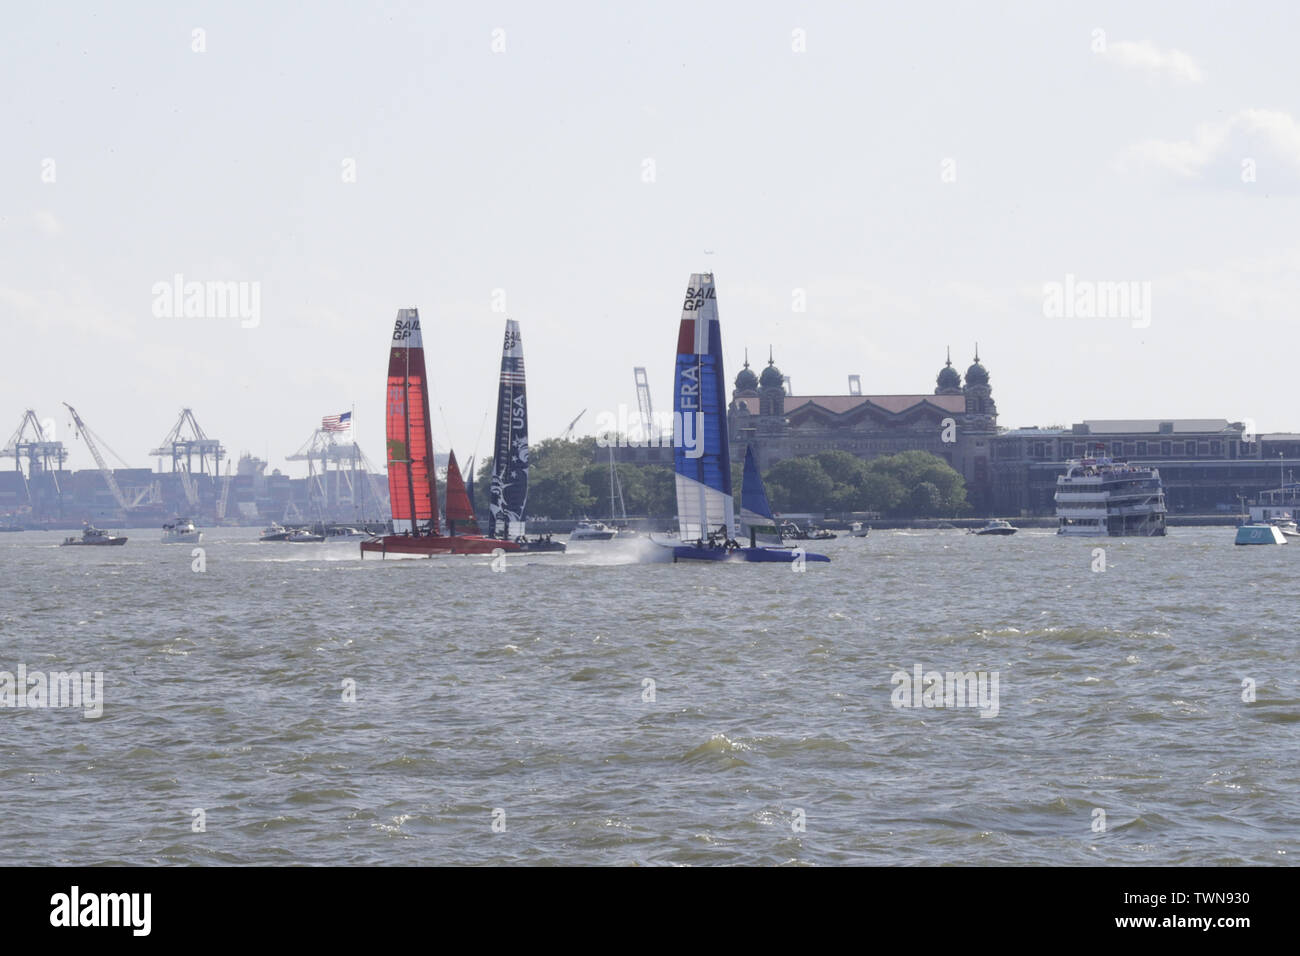 New York, NY, USA. 21st June, 2019. Hudson River, New York, USA, June 21, 2019 - SailGP teams sail their race during racing day 1 of the SailGP event today in New York.Photo: Luiz Rampelotto/EuropaNewswire.PHOTO CREDIT MANDATORY. Credit: Luiz Rampelotto/ZUMA Wire/Alamy Live News Stock Photo